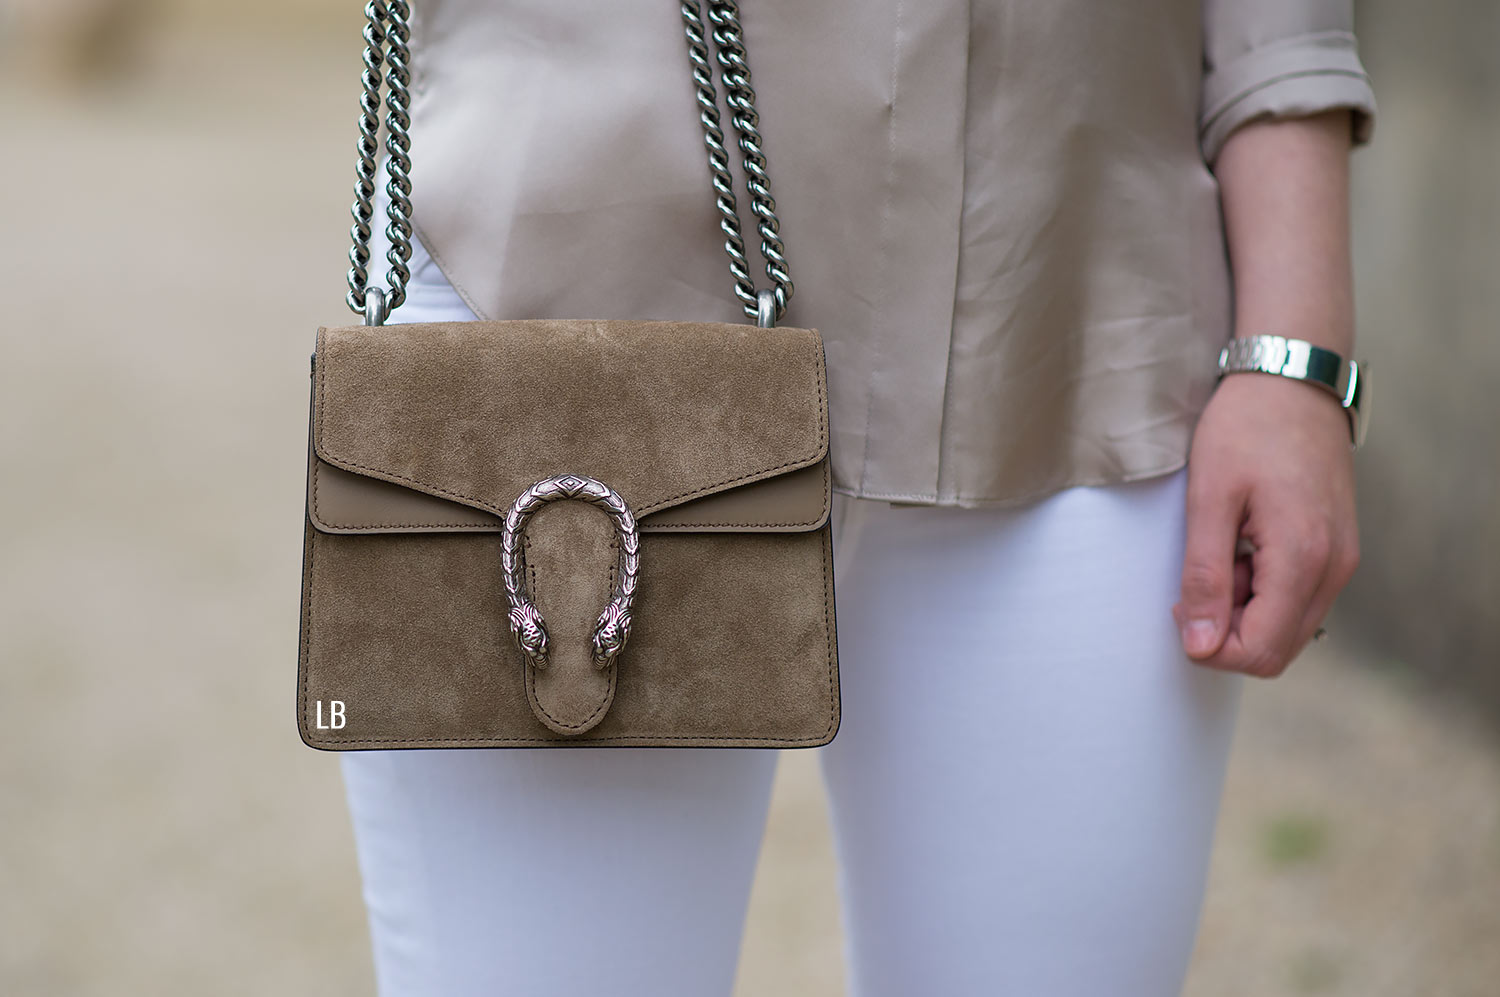 GUCCI Dionysus Mini Chain Bag in Taupe - More Than You Can Imagine